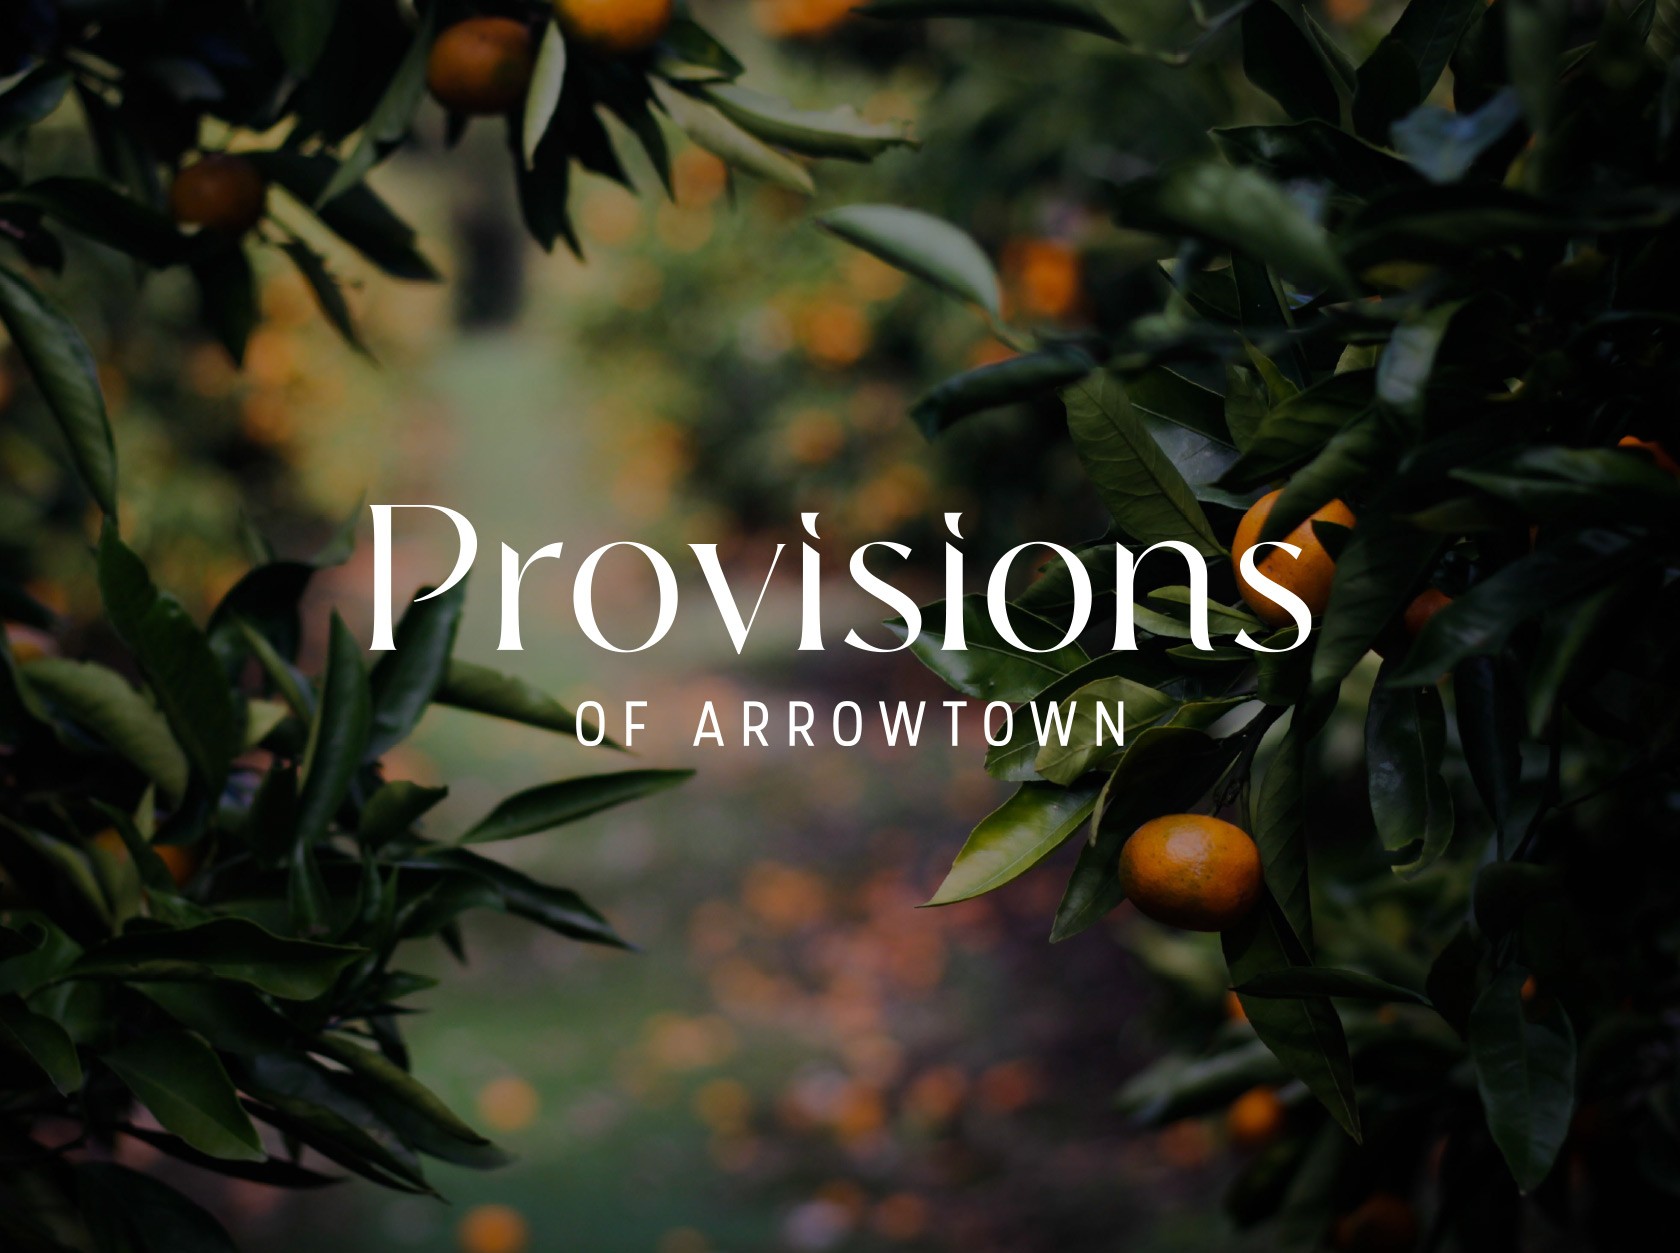 Provisions of Arrowtown Feature Image Landscape